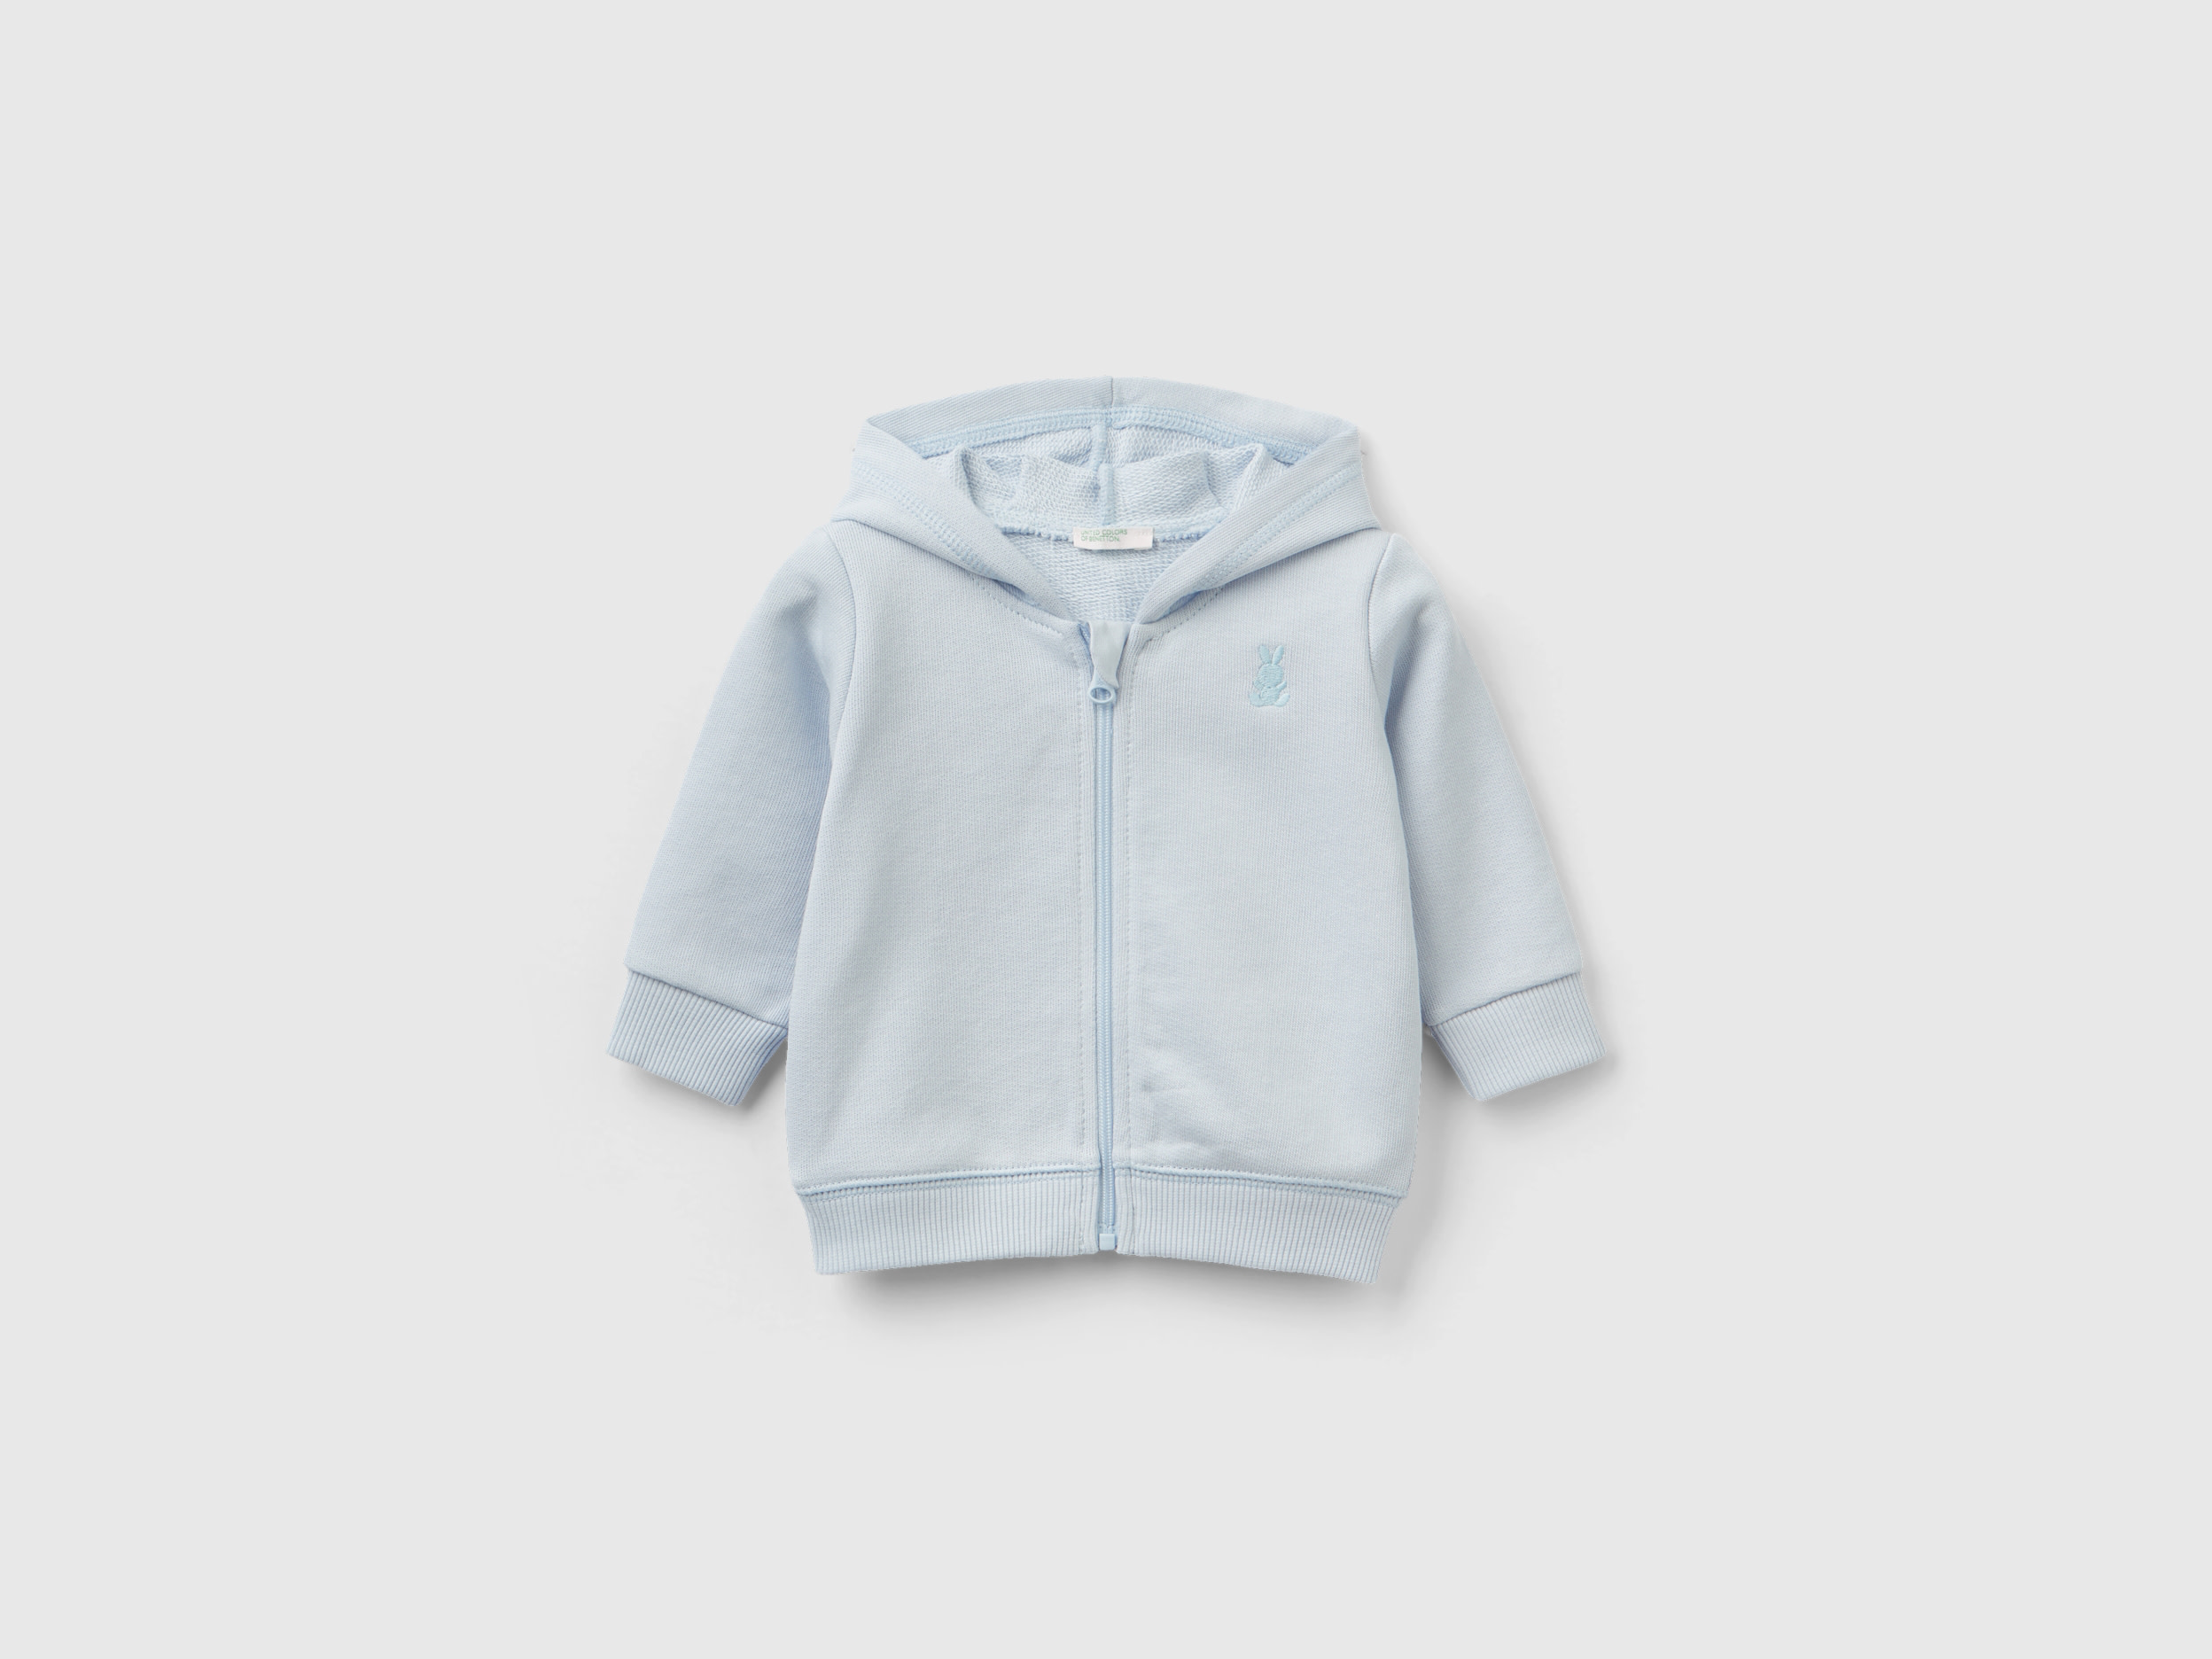 Image of Benetton, Hoodie In Organic Cotton, size 82, Sky Blue, Kids